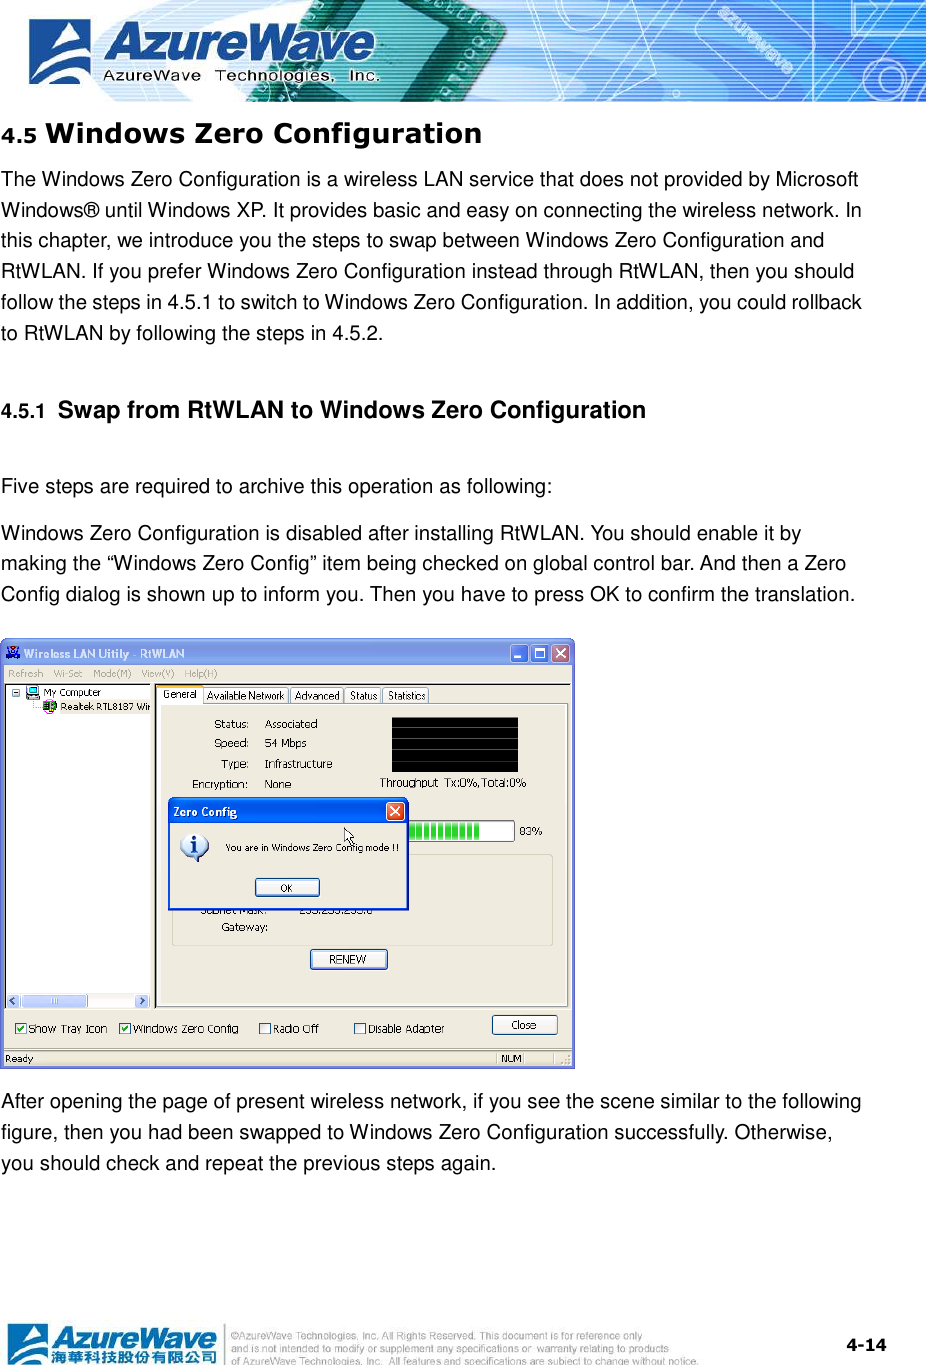  4-144.5 Windows Zero Configuration The Windows Zero Configuration is a wireless LAN service that does not provided by Microsoft Windows® until Windows XP. It provides basic and easy on connecting the wireless network. In this chapter, we introduce you the steps to swap between Windows Zero Configuration and RtWLAN. If you prefer Windows Zero Configuration instead through RtWLAN, then you should follow the steps in 4.5.1 to switch to Windows Zero Configuration. In addition, you could rollback to RtWLAN by following the steps in 4.5.2. 4.5.1  Swap from RtWLAN to Windows Zero Configuration Five steps are required to archive this operation as following: Windows Zero Configuration is disabled after installing RtWLAN. You should enable it by making the “Windows Zero Config” item being checked on global control bar. And then a Zero Config dialog is shown up to inform you. Then you have to press OK to confirm the translation.           After opening the page of present wireless network, if you see the scene similar to the following figure, then you had been swapped to Windows Zero Configuration successfully. Otherwise, you should check and repeat the previous steps again. 